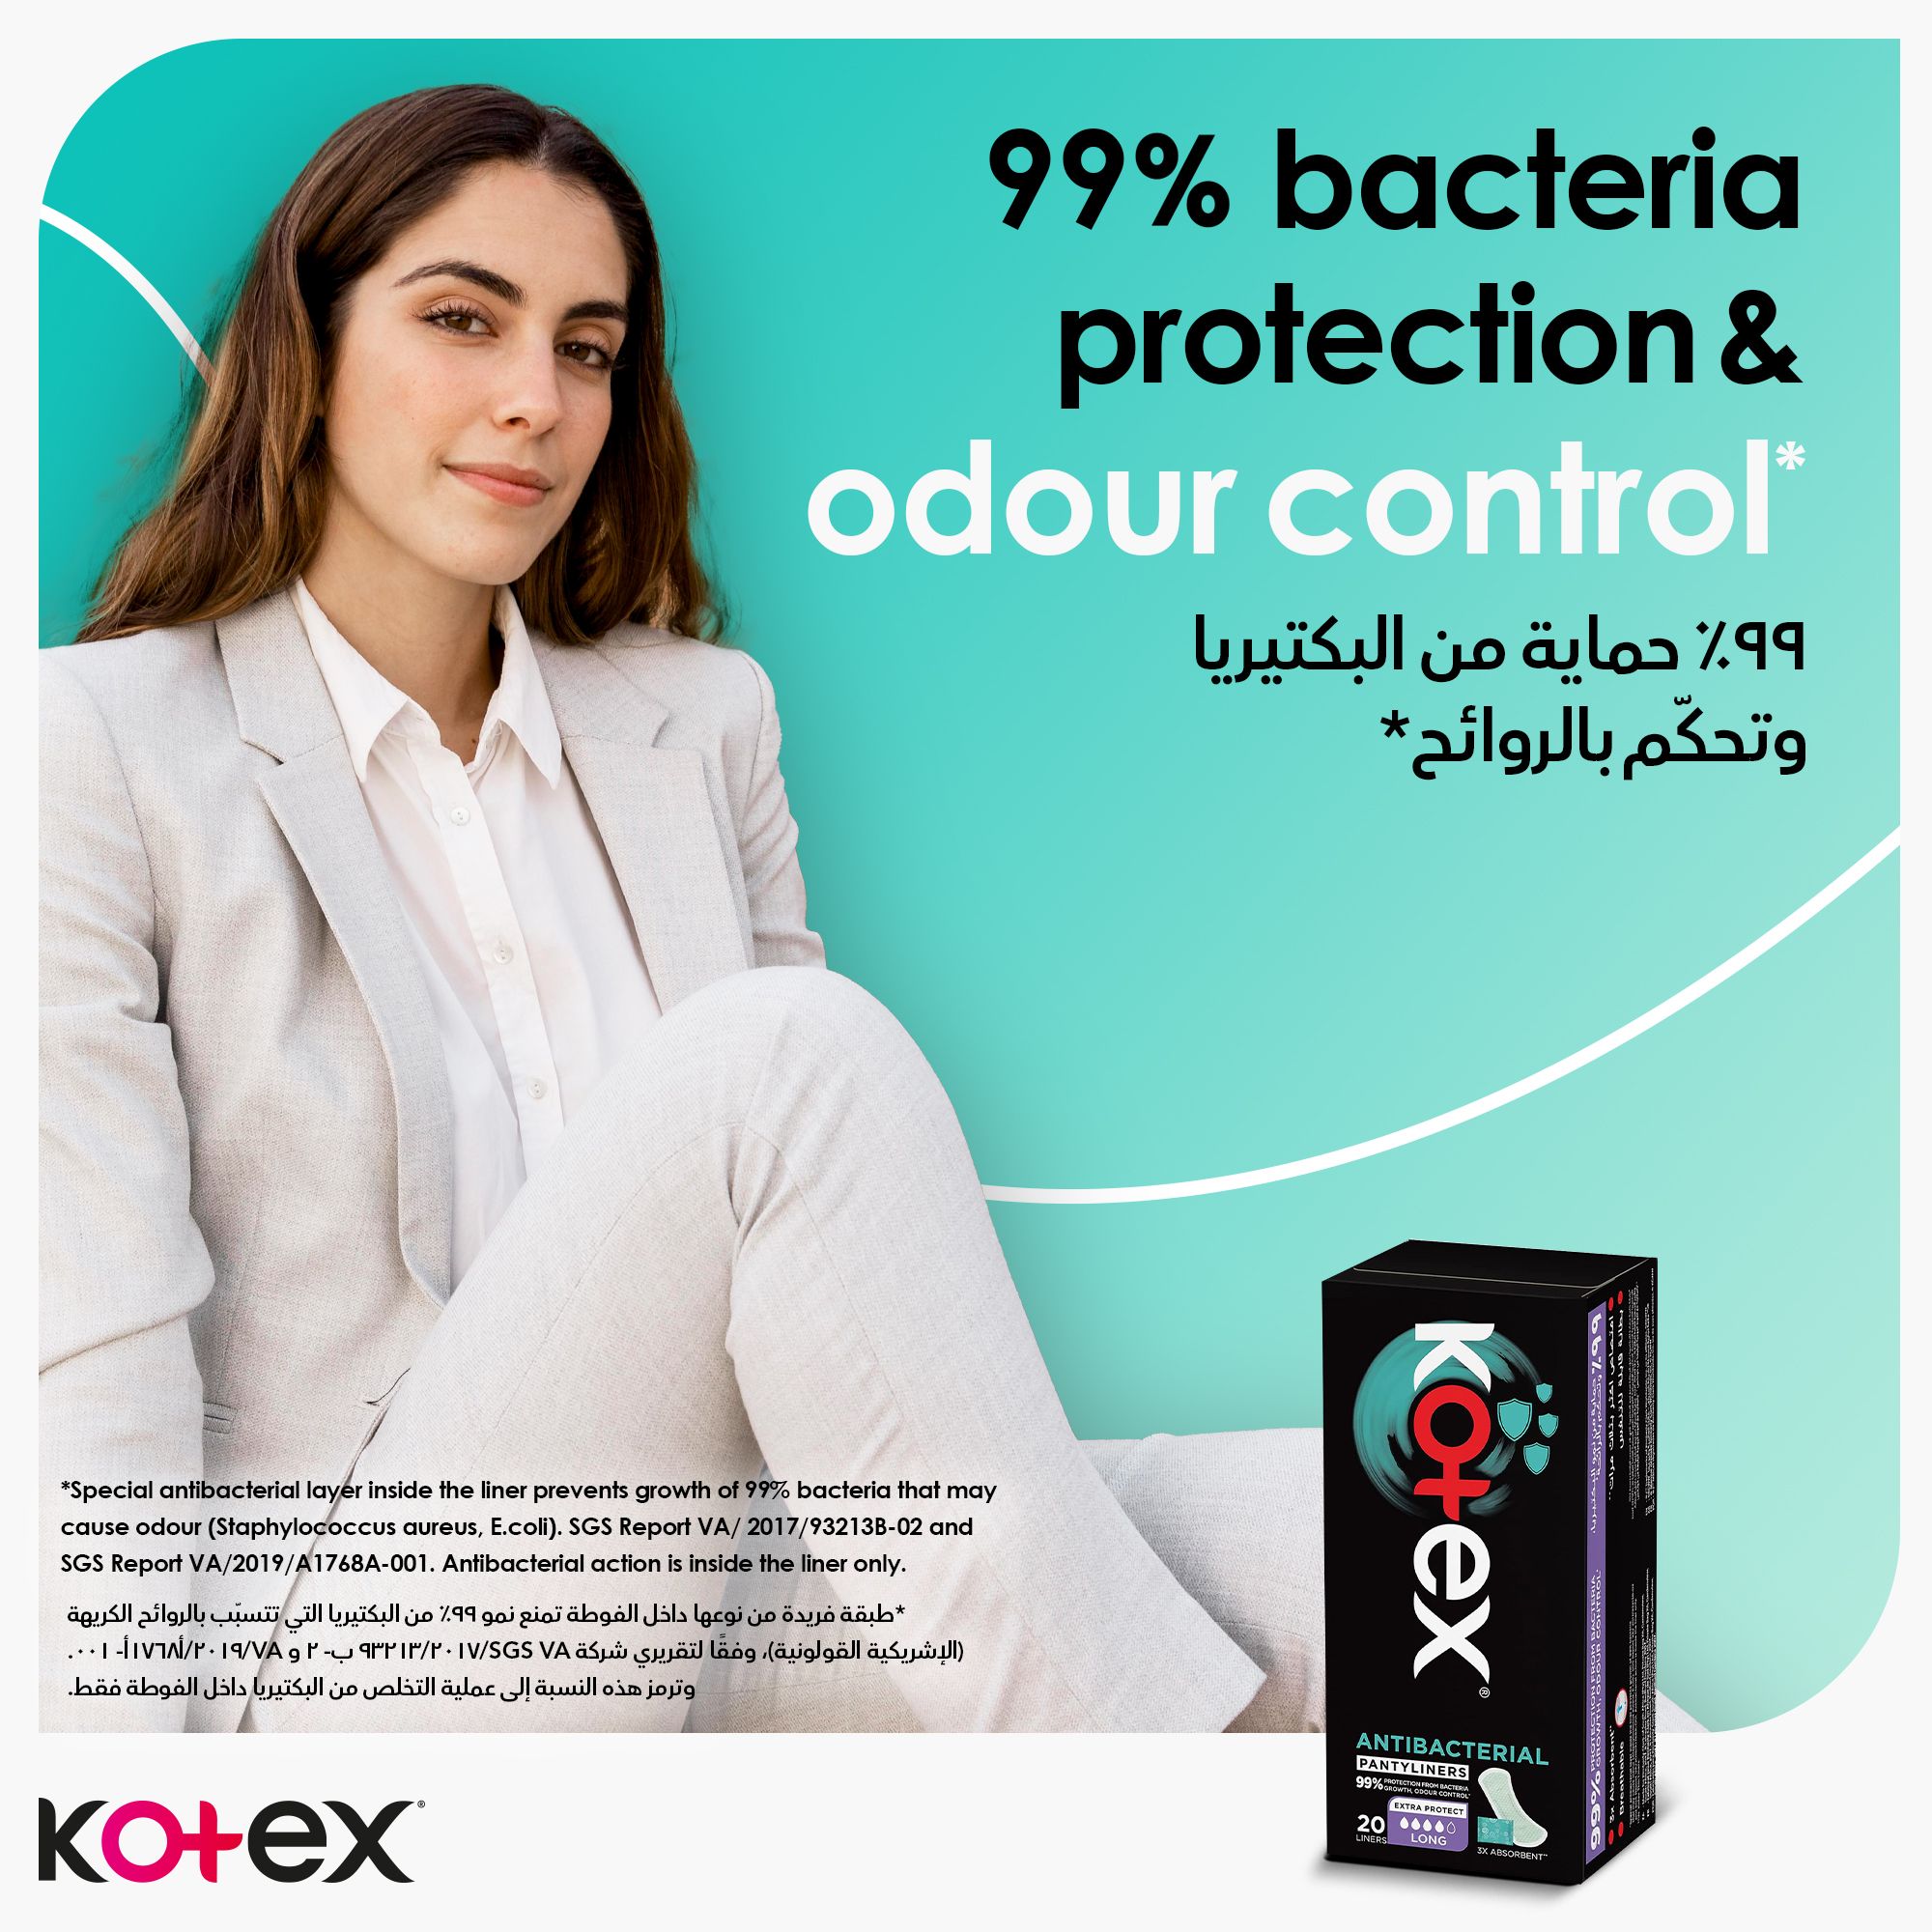 Kotex Antibacterial Panty Liners, 99% Protection from Bacteria Growth, Long Size, 44 Daily Panty Liners